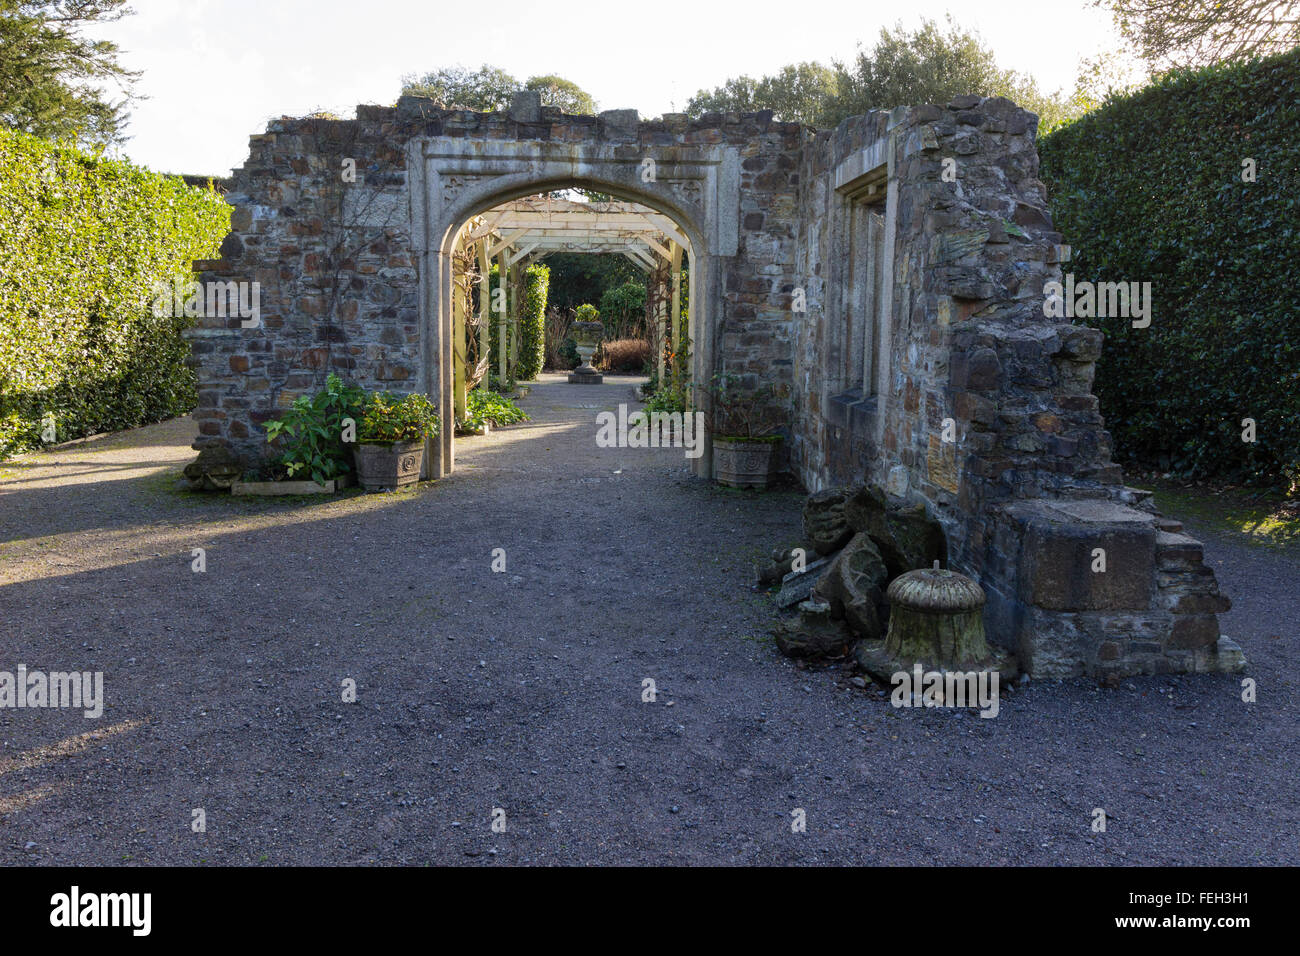 Late winter sunlight lights the reconstructed stonework of the relic garden at Mt Edgcumbe, Cornwall Stock Photo